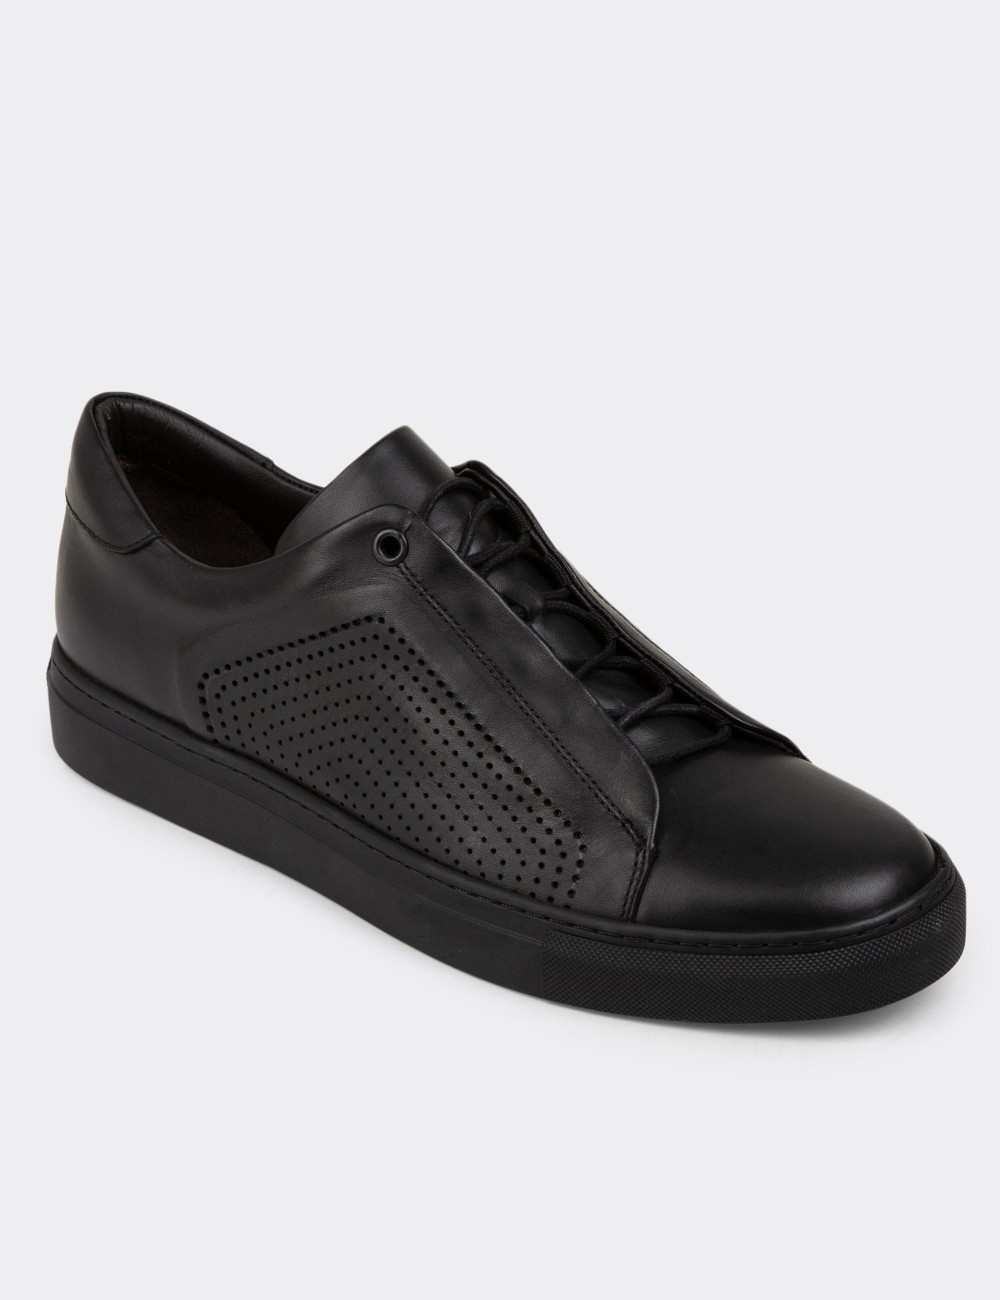 Black Leather Sneakers - 01834MSYHC02